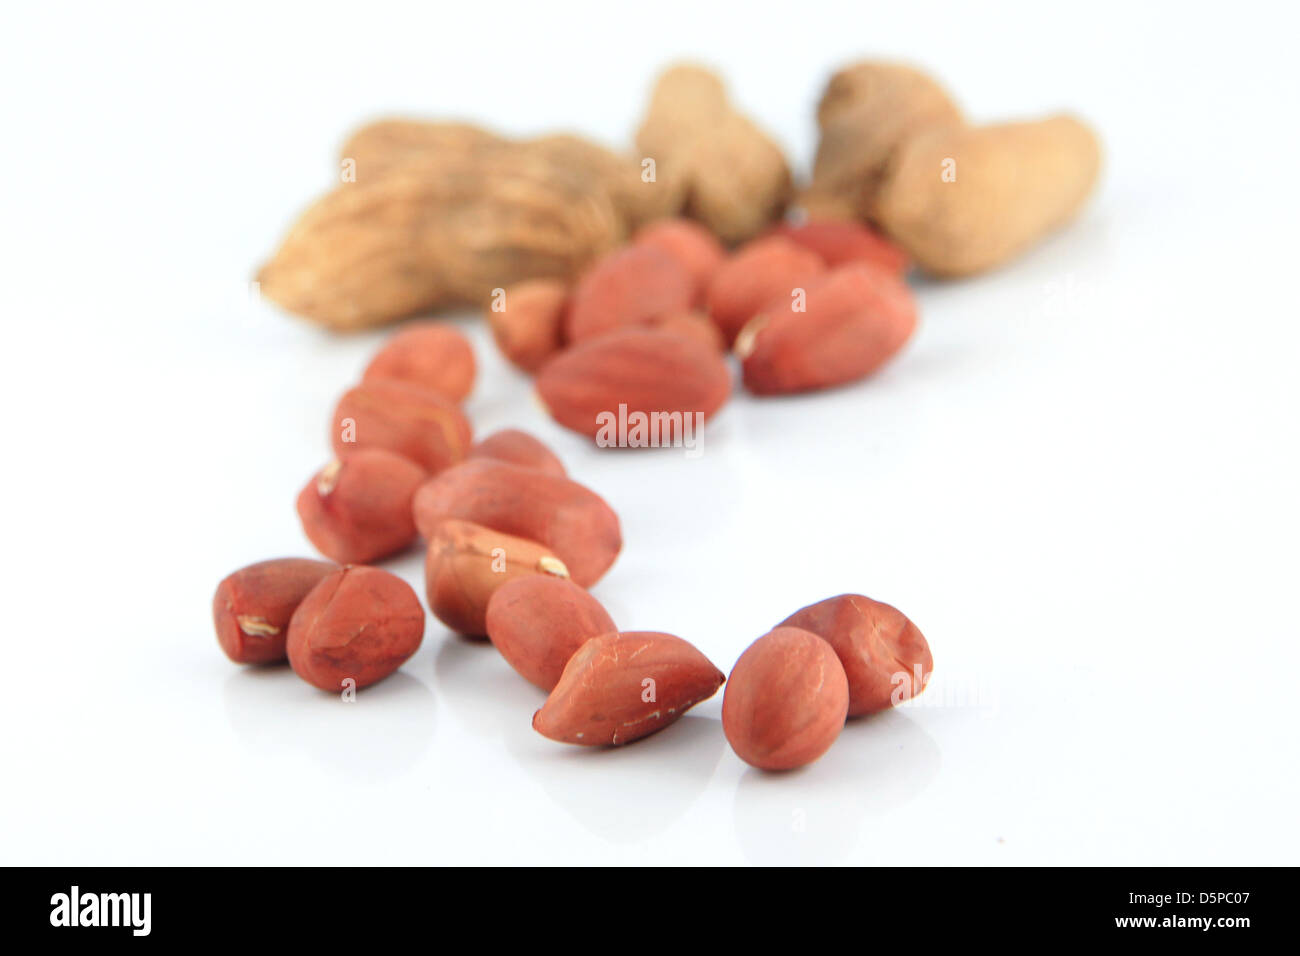 A lot of Peanuts on isolated over white background,focus on foreground. Stock Photo